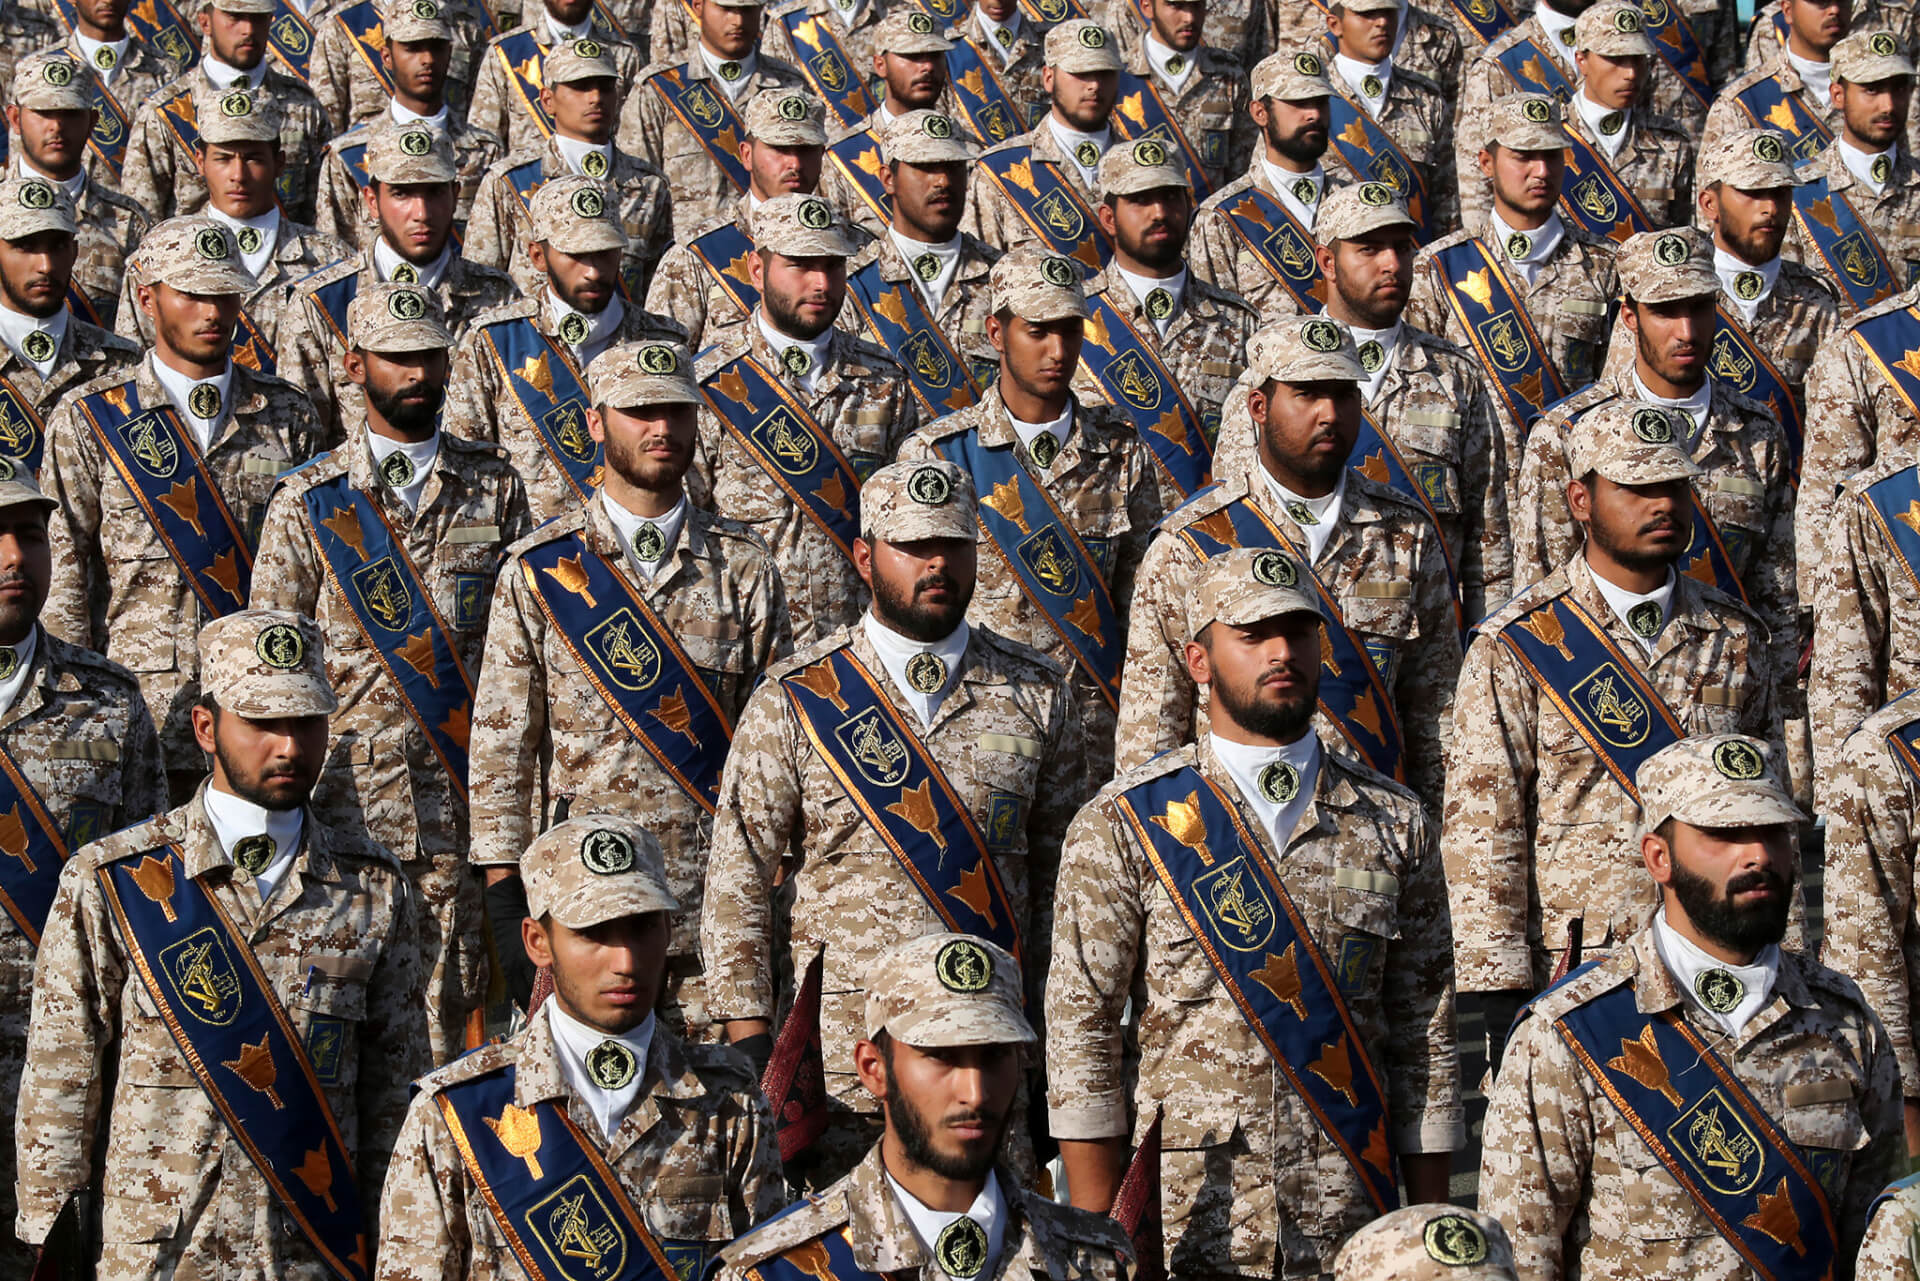 Iran Drops Demand for Removing IRGC From Sanctions as Nuclear Talks Resume in Qatar